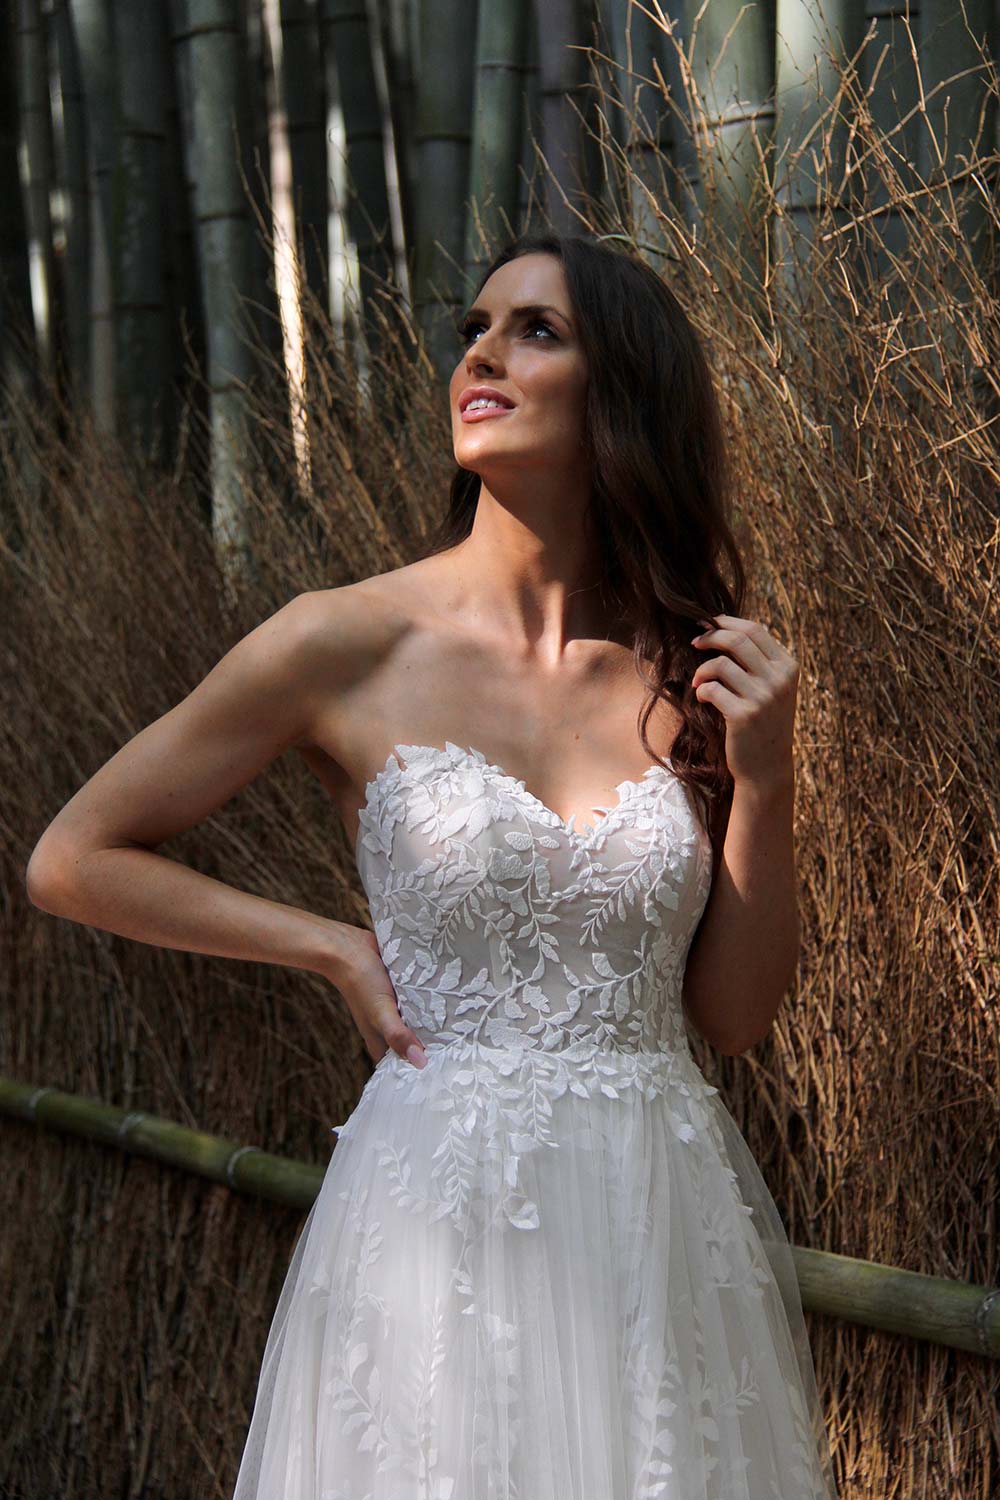 Female model wearing Vinka Design An Oriental Affair Wedding Dress. In a Japanese bamboo forest the front detail of gown with a strapless bodice with leaf lace and a full length train skirt